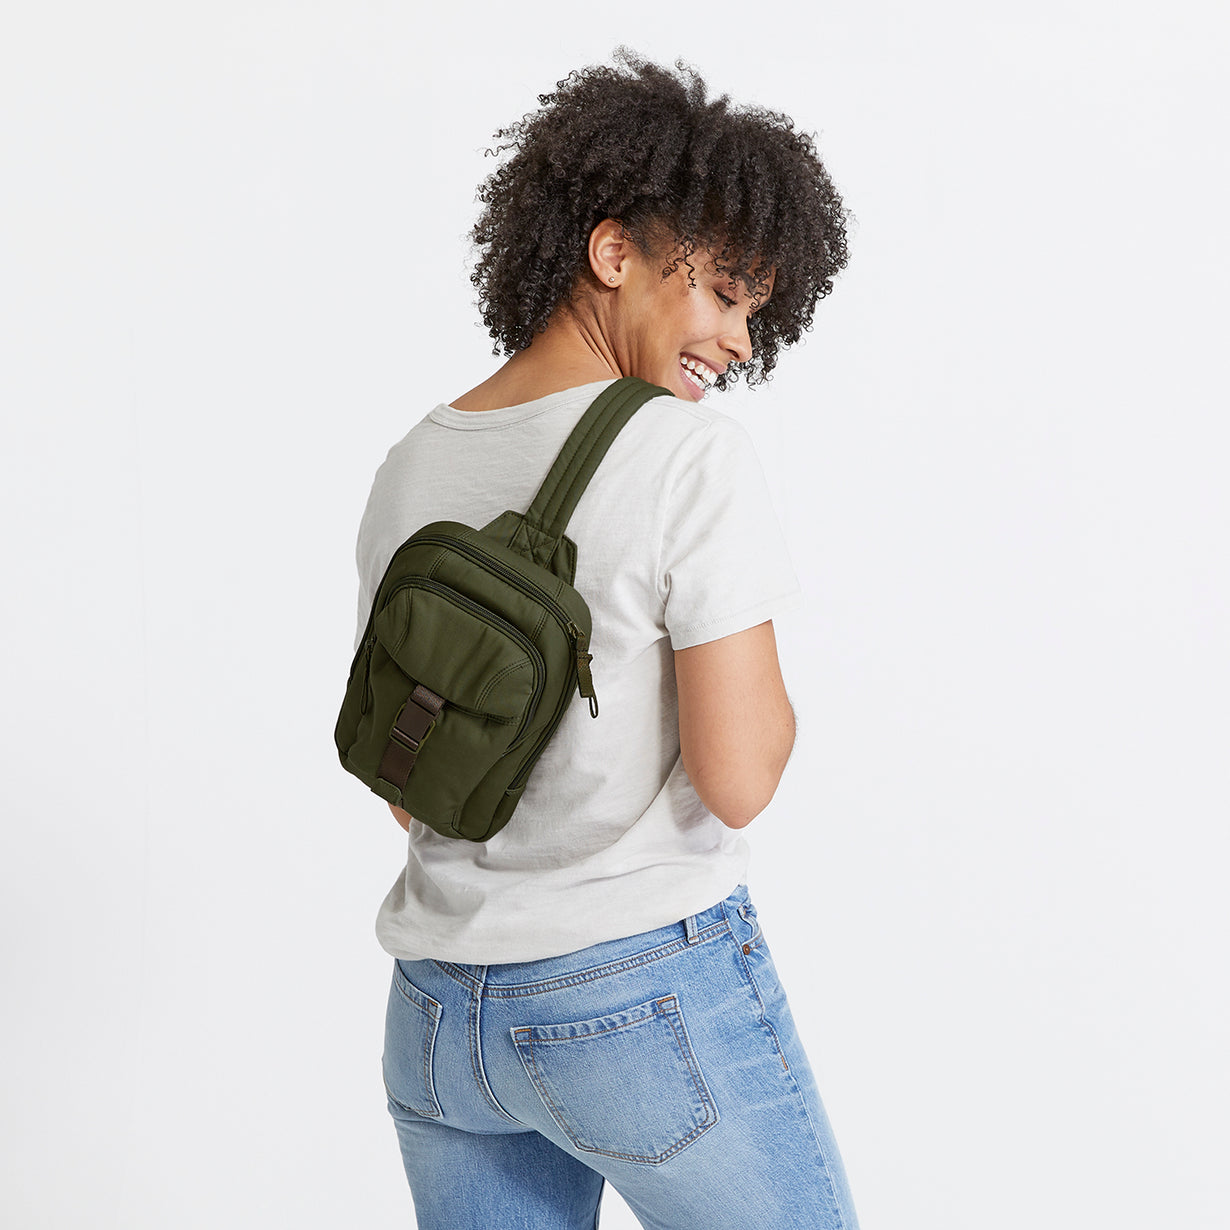 Shoulder Backpack Services – Learn how to Do It Right